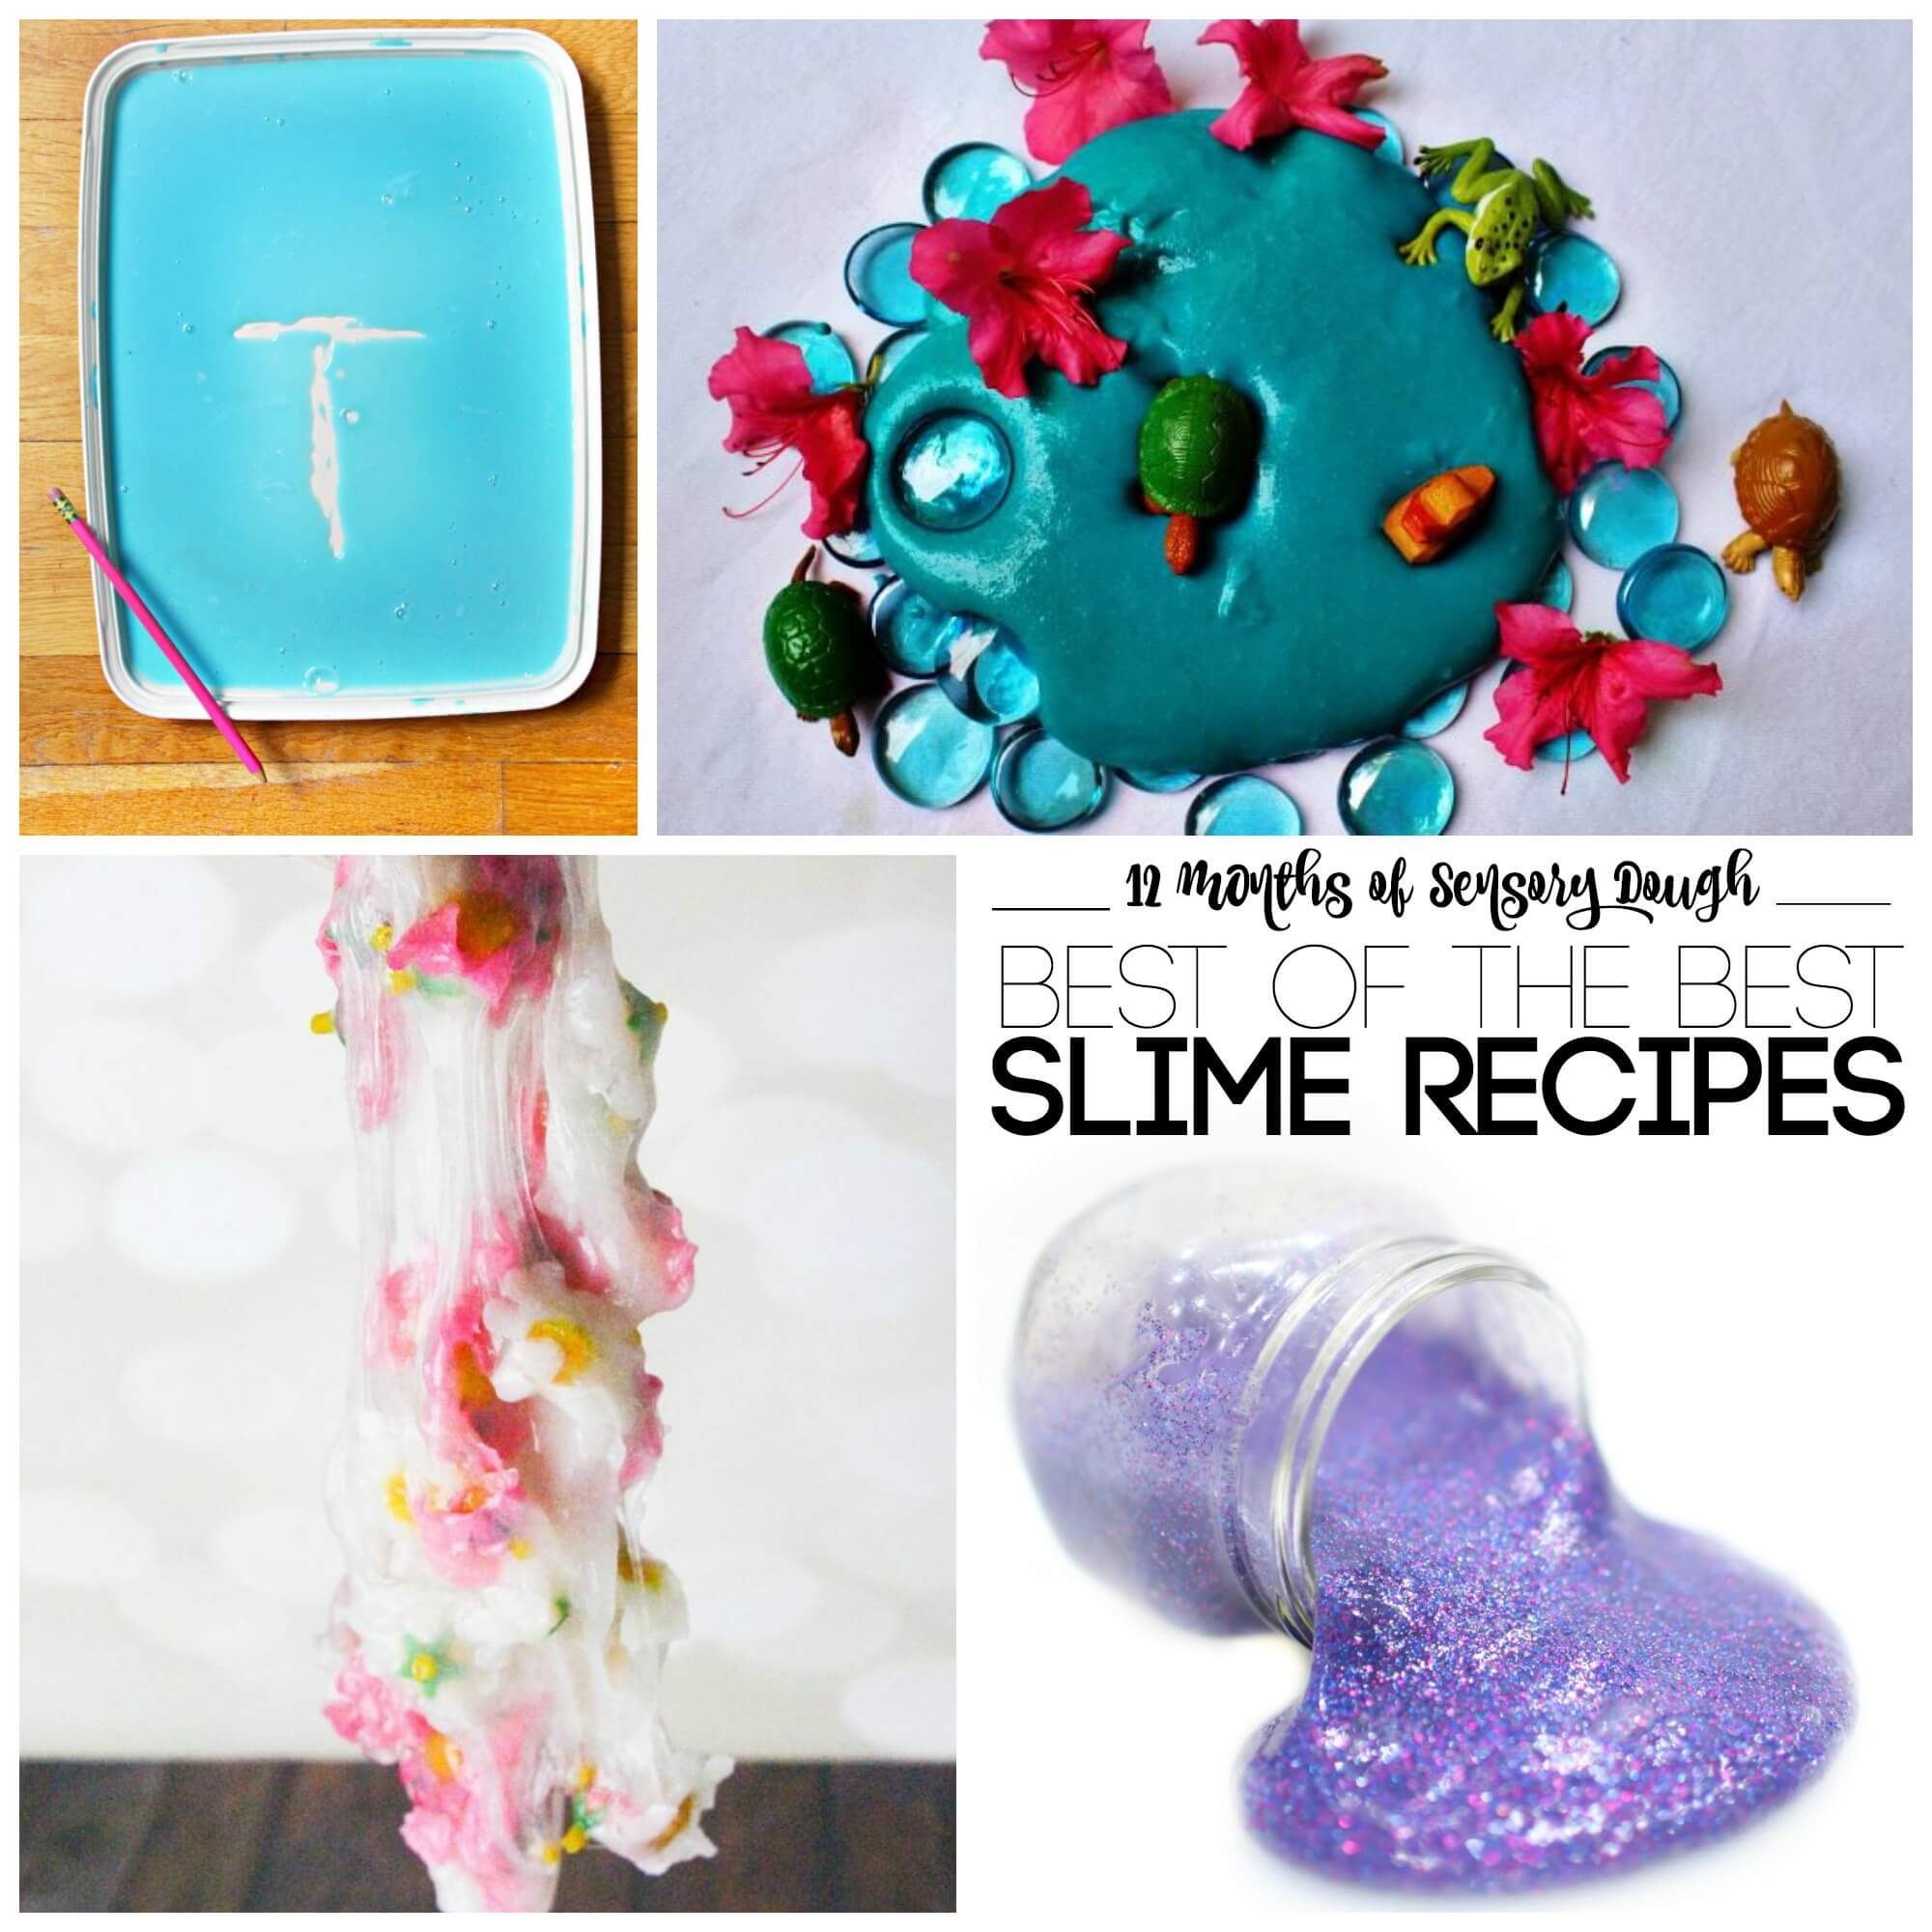 Best of the best Slime Recipes